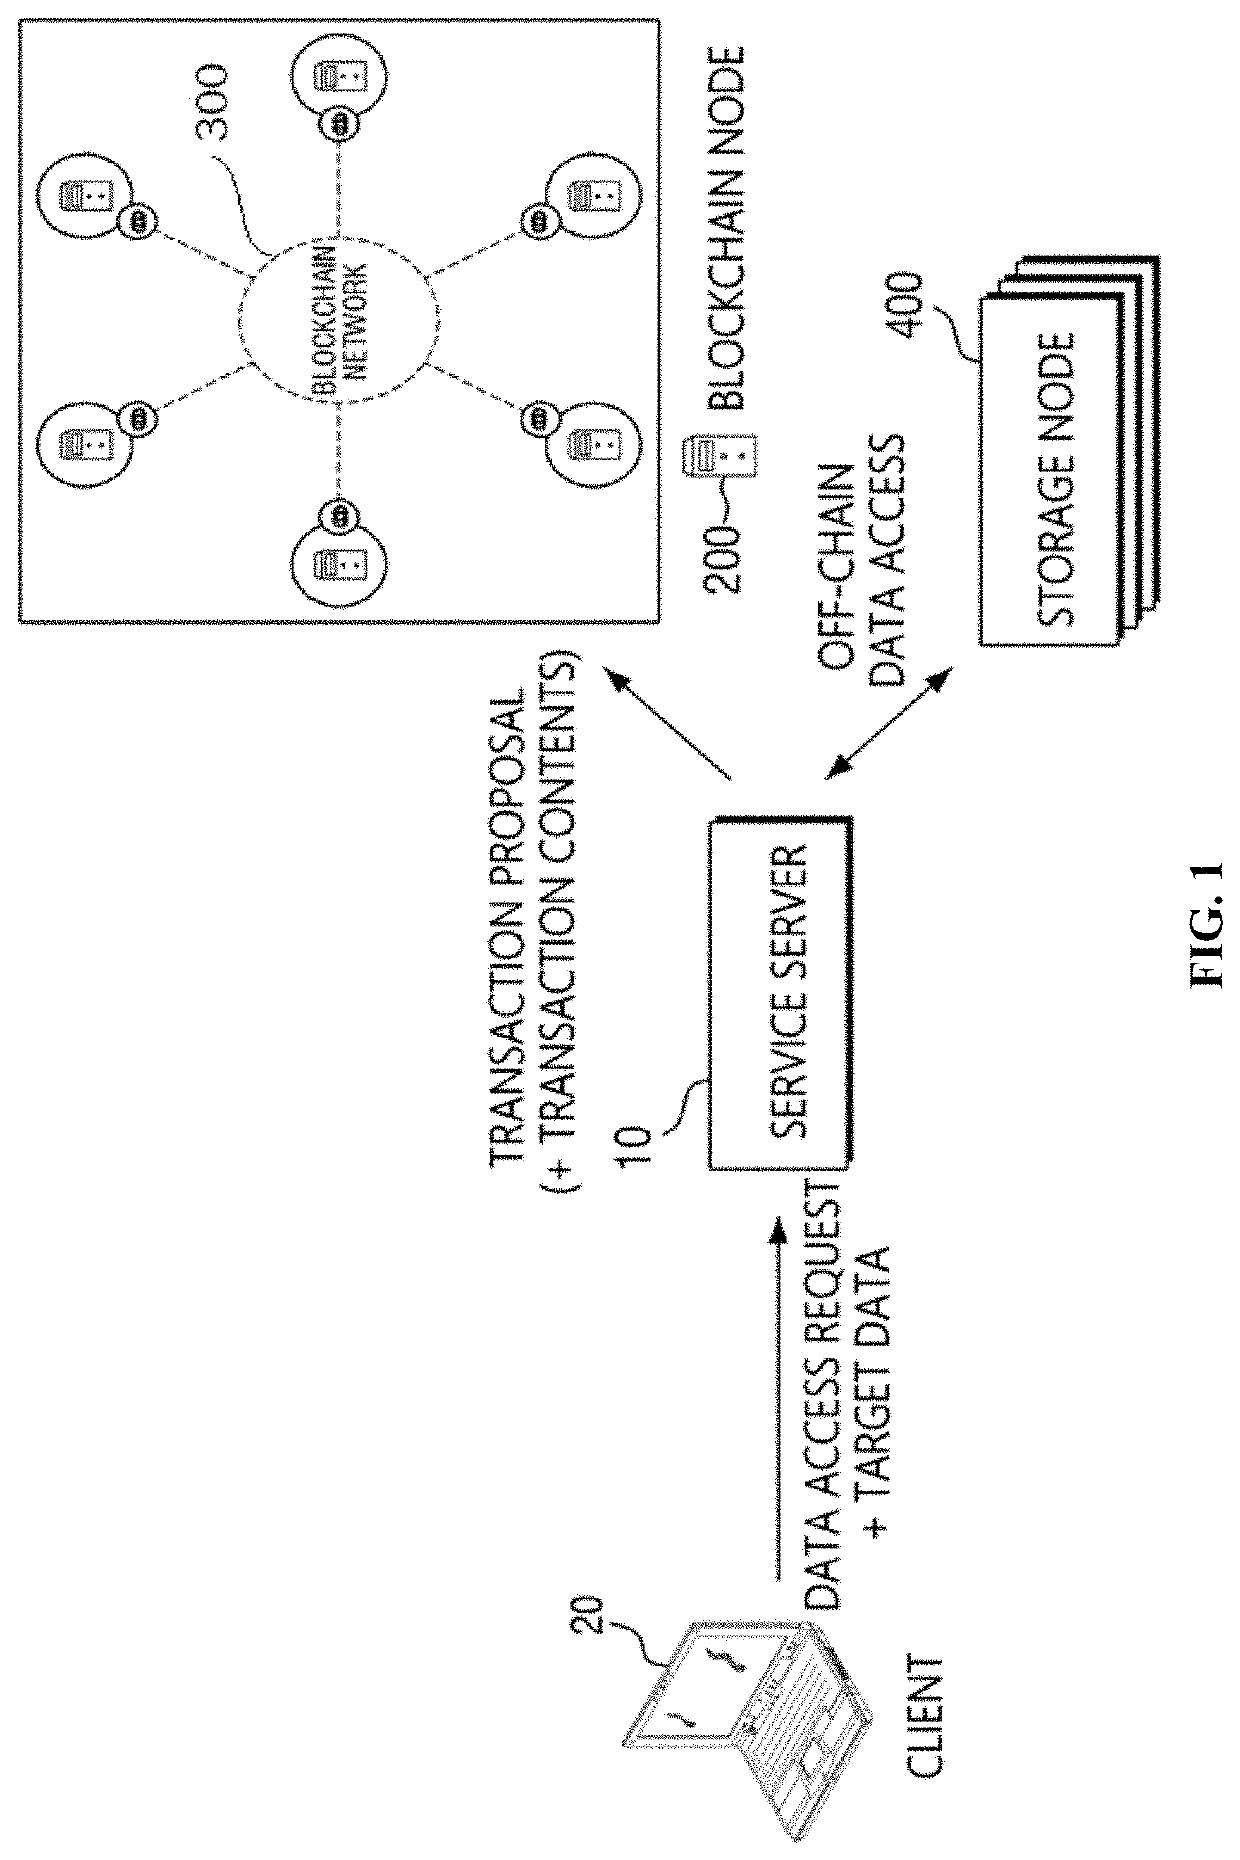 Off-chain data sharing system and method thereof